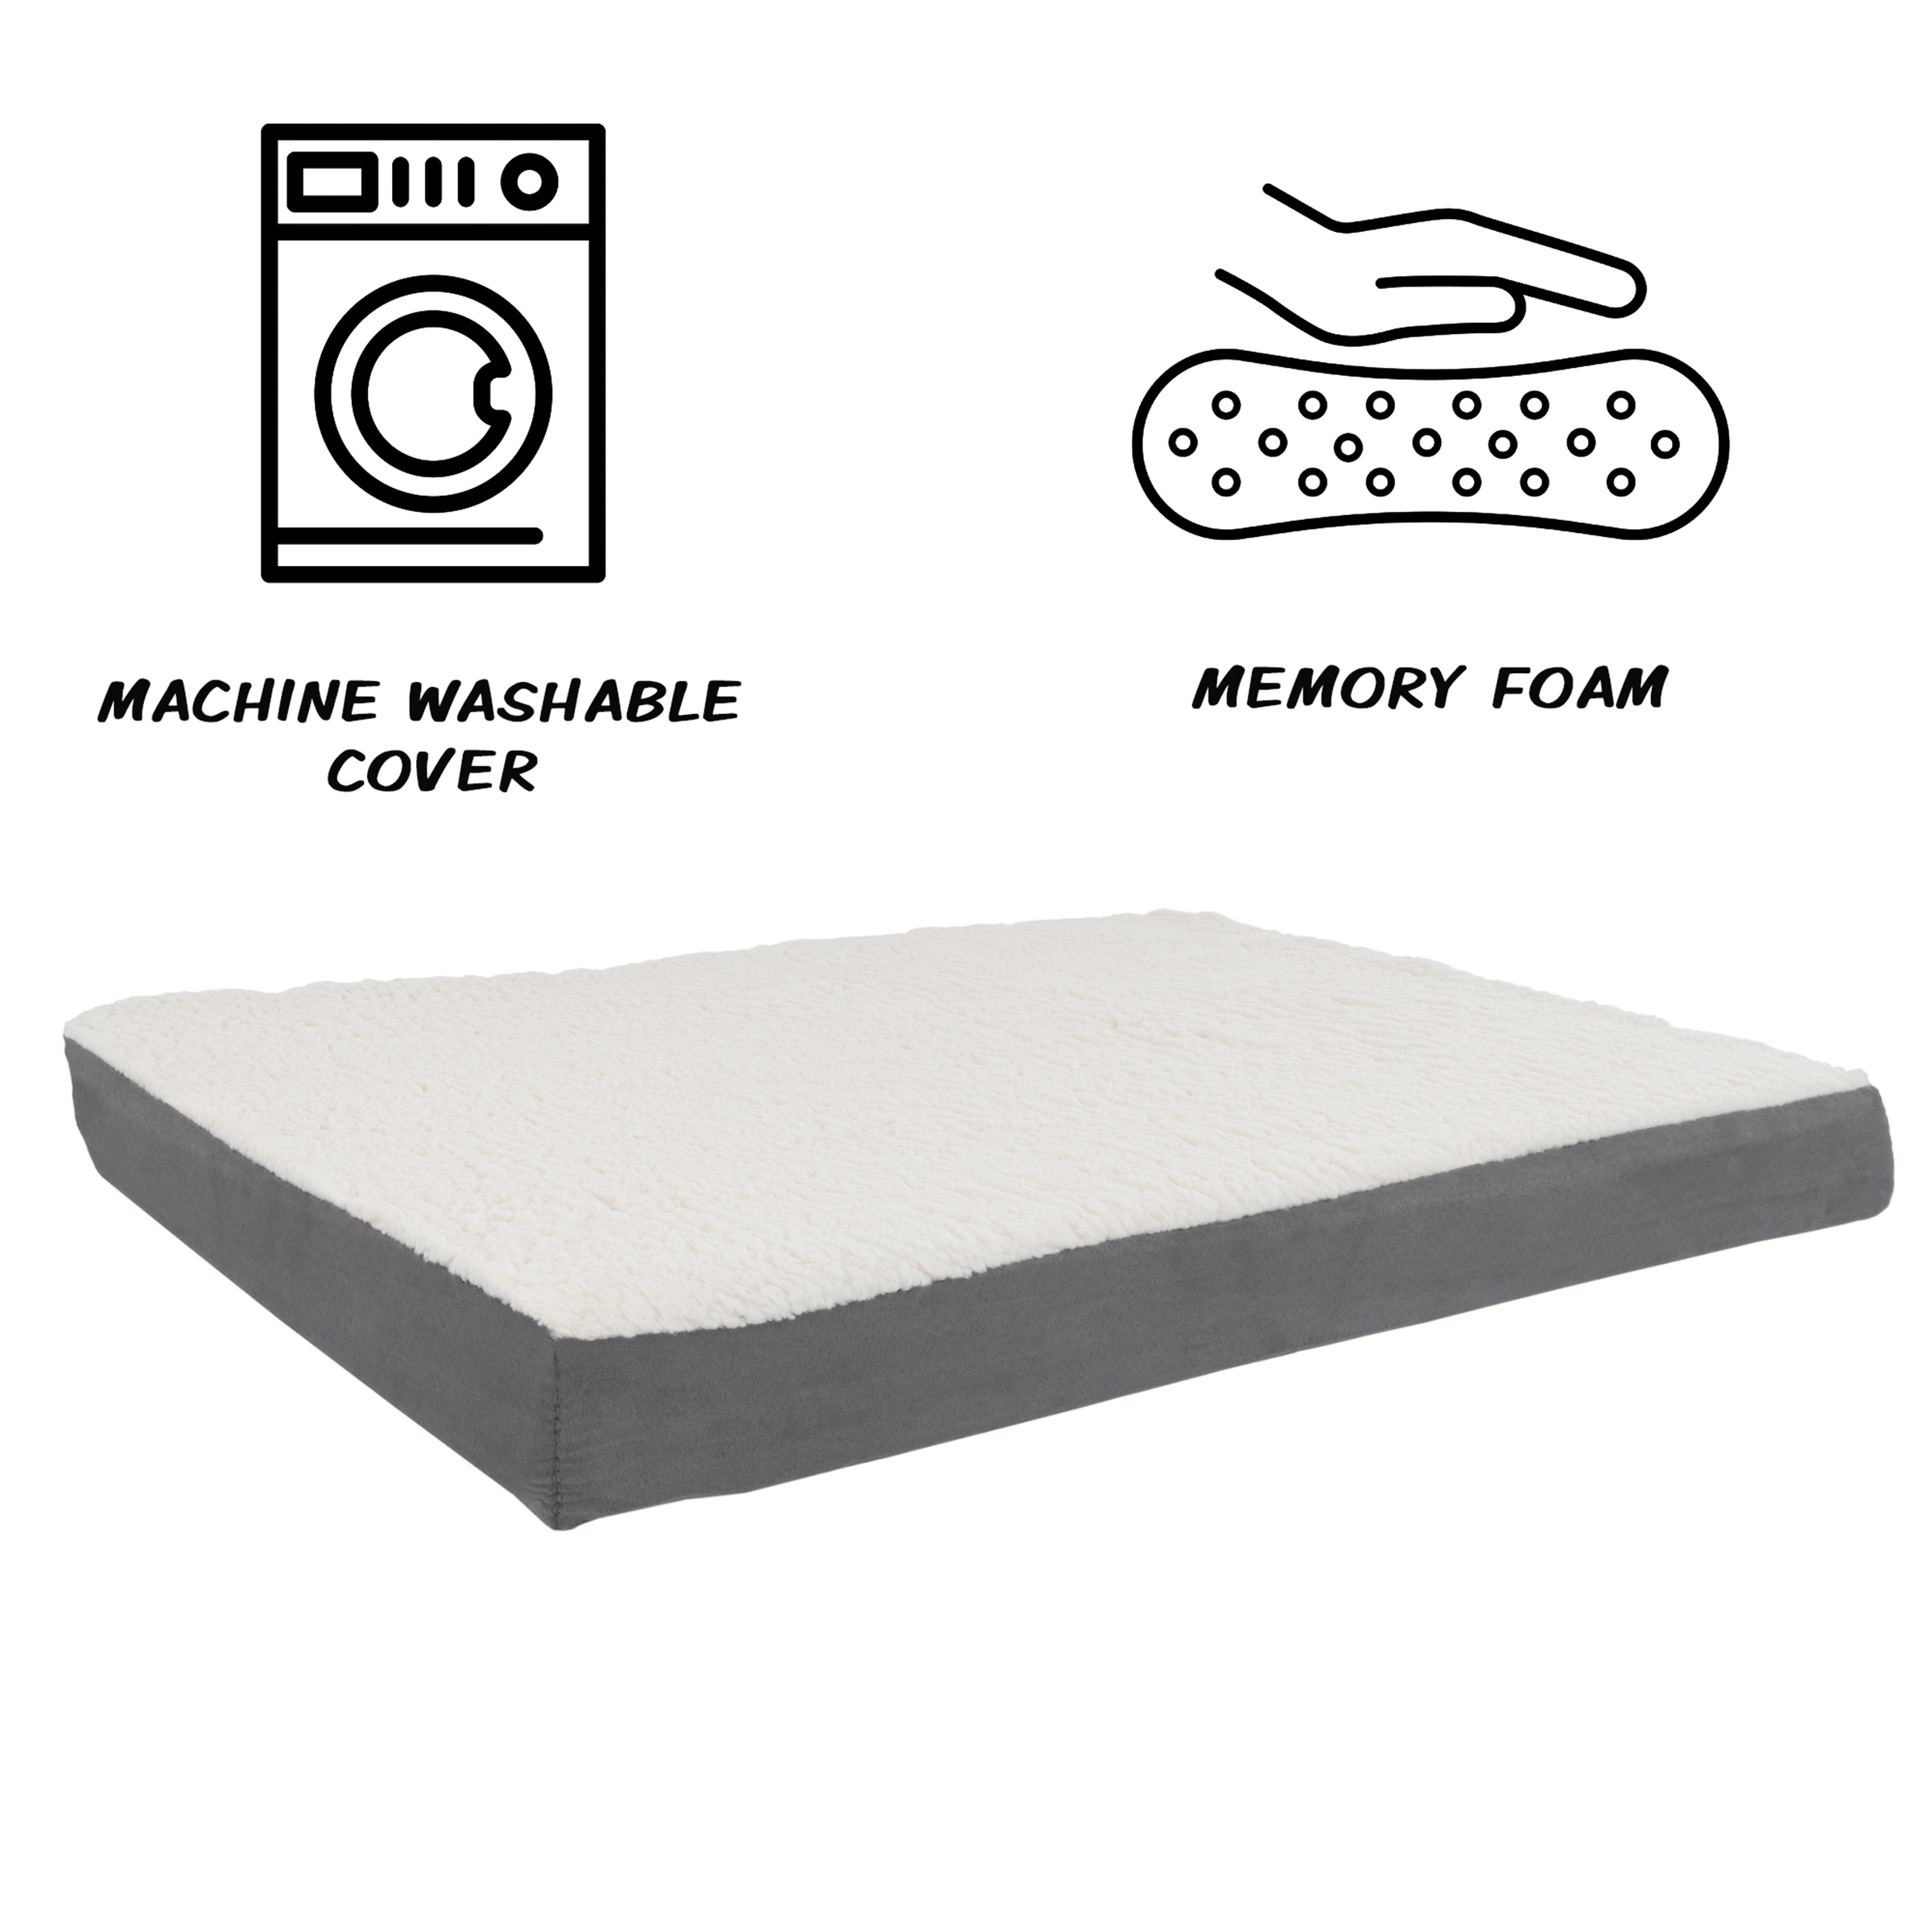 Orthopedic Dog Bed - 2-Layer 36x27-Inch Memory Foam Pet Mattress with Machine-Washable Sherpa Cover for Large Dogs up to 65lbs by PETMAKER (Gray) - image 3 of 7